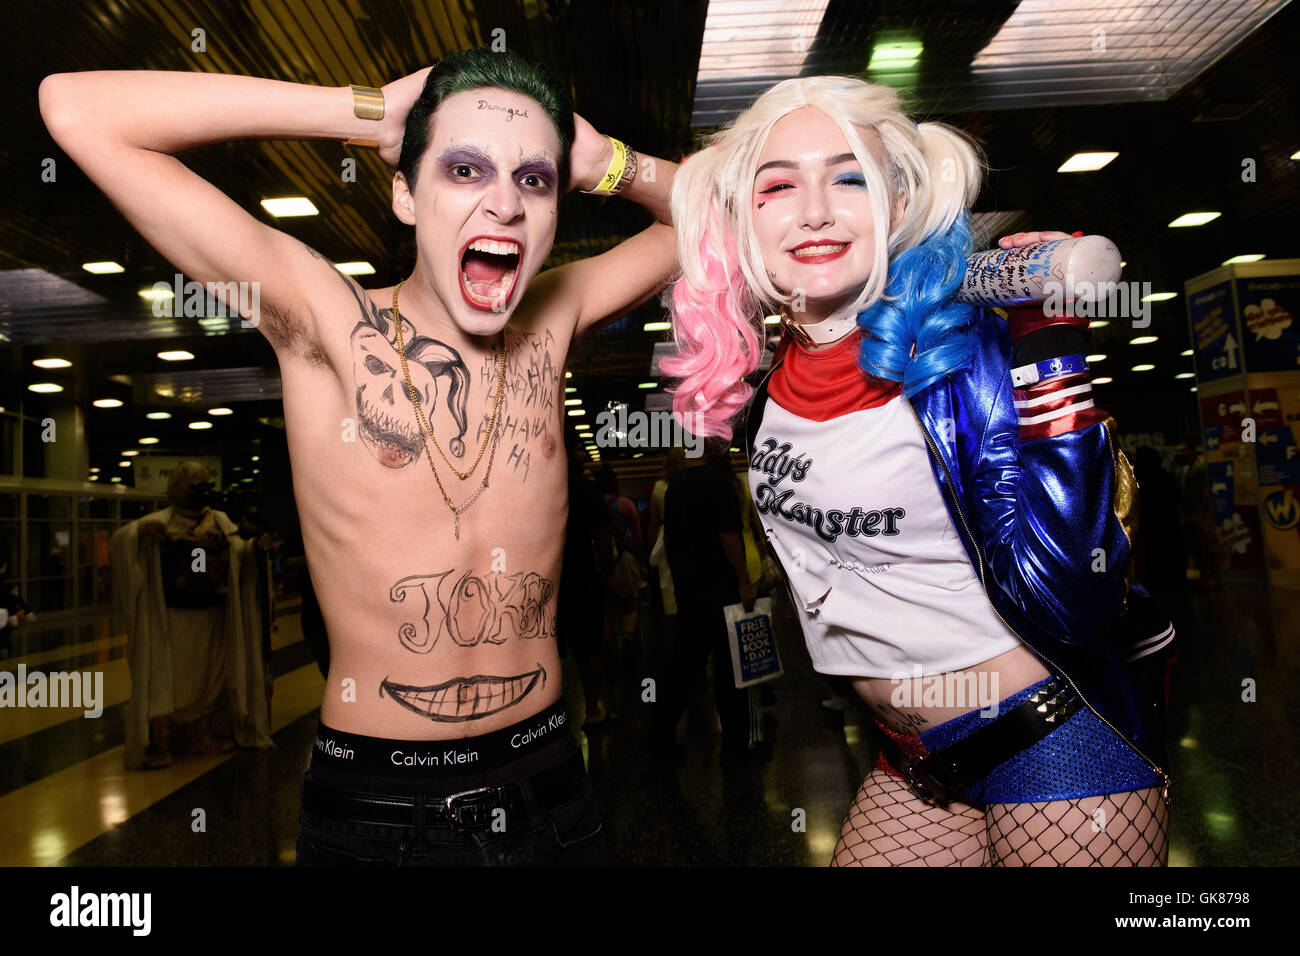 Chicago, Illinois, USA. 18th August 2016. Cosplayers dressed as The Joker and Harley Quinn from 'Suicide Squad' attend the Wizard World Chicago Comic Con at Donald E. Stephens Convention Center in Rosemont, IL. Credit:  Daniel Boczarski/Alamy Live News Stock Photo